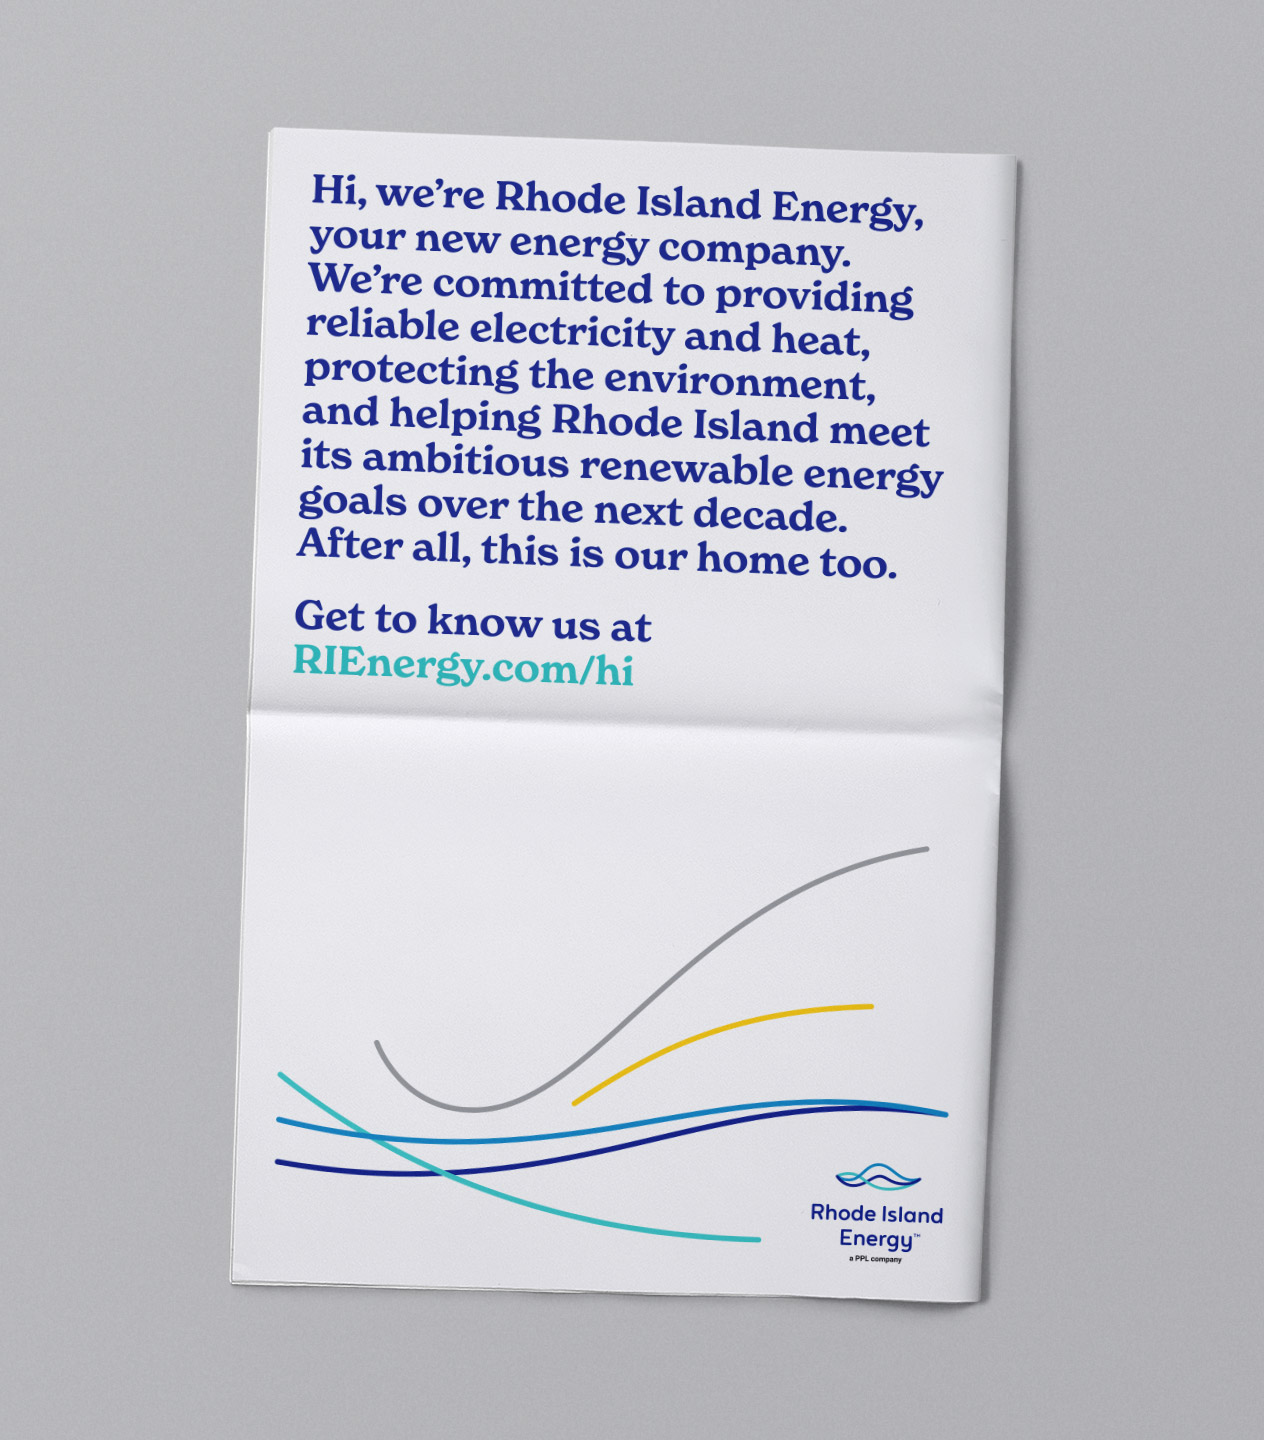 Hi, we're Rhode Island Energy, your new energy company. We're committed to providing reliable electricity and heat, protecting the environment, and helping Rhode Island meet its ambitious renewable energy goals over the next decade. After all, this is our home too. Get to us at RIEnergy.com/hi